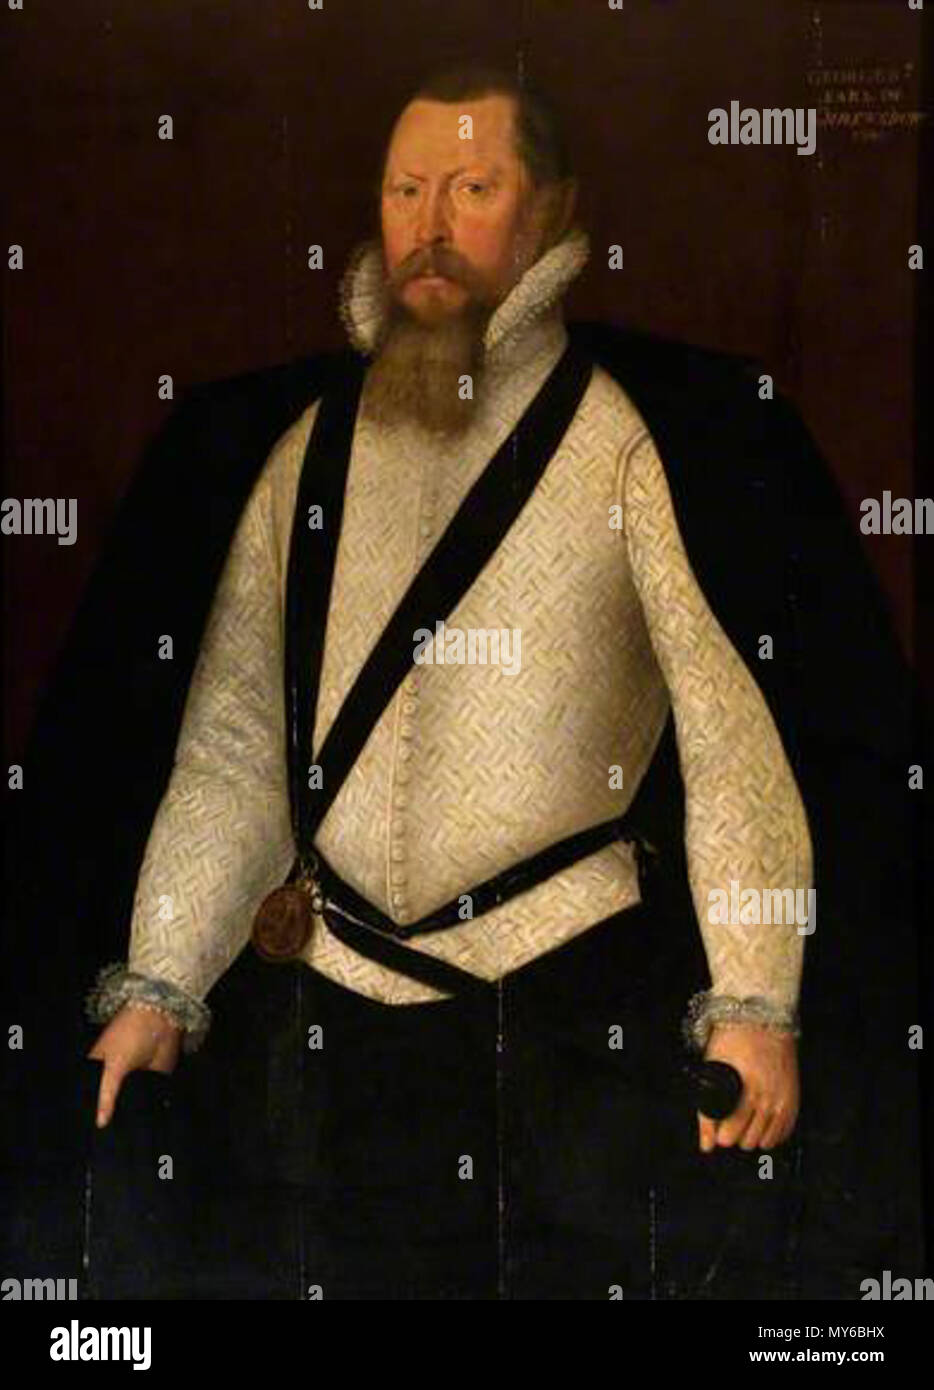 . English: Portrait of George Talbot, 6th Earl of Shrewsbury, by an unknown artist of the English school. Dated 1580. Oil on canvas, 110 cm x 90 cm. Courtesy of the collections of Ingestre Hall Residential Arts Centre. 18 January 2012, 04:33:24. unknown painter of the English school 207 George Talbot, 6th Earl of Shrewsbury by an unknown artist 1580 Stock Photo